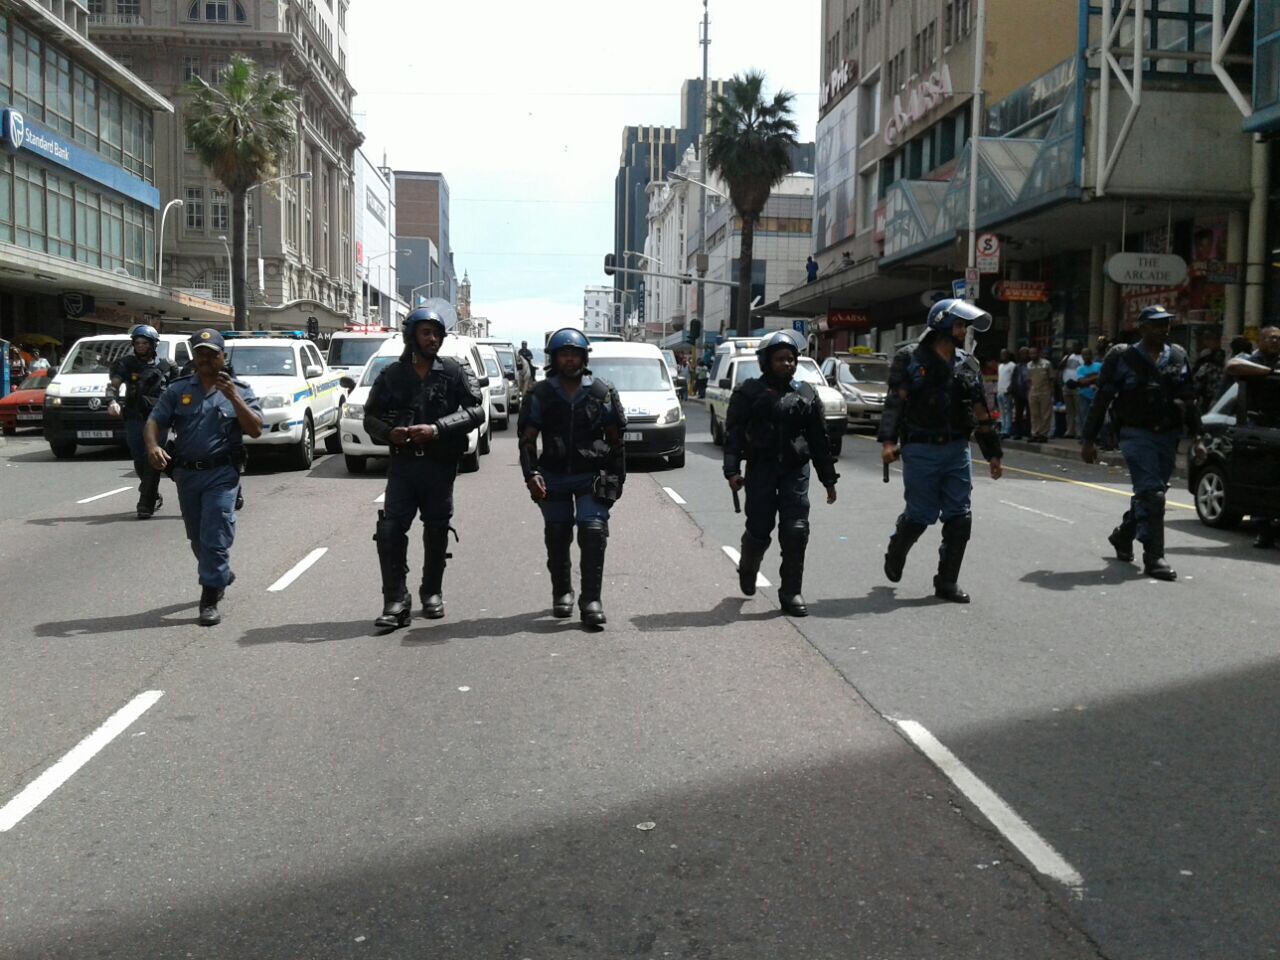 Police escorting students to City Hall. #KZNFMF